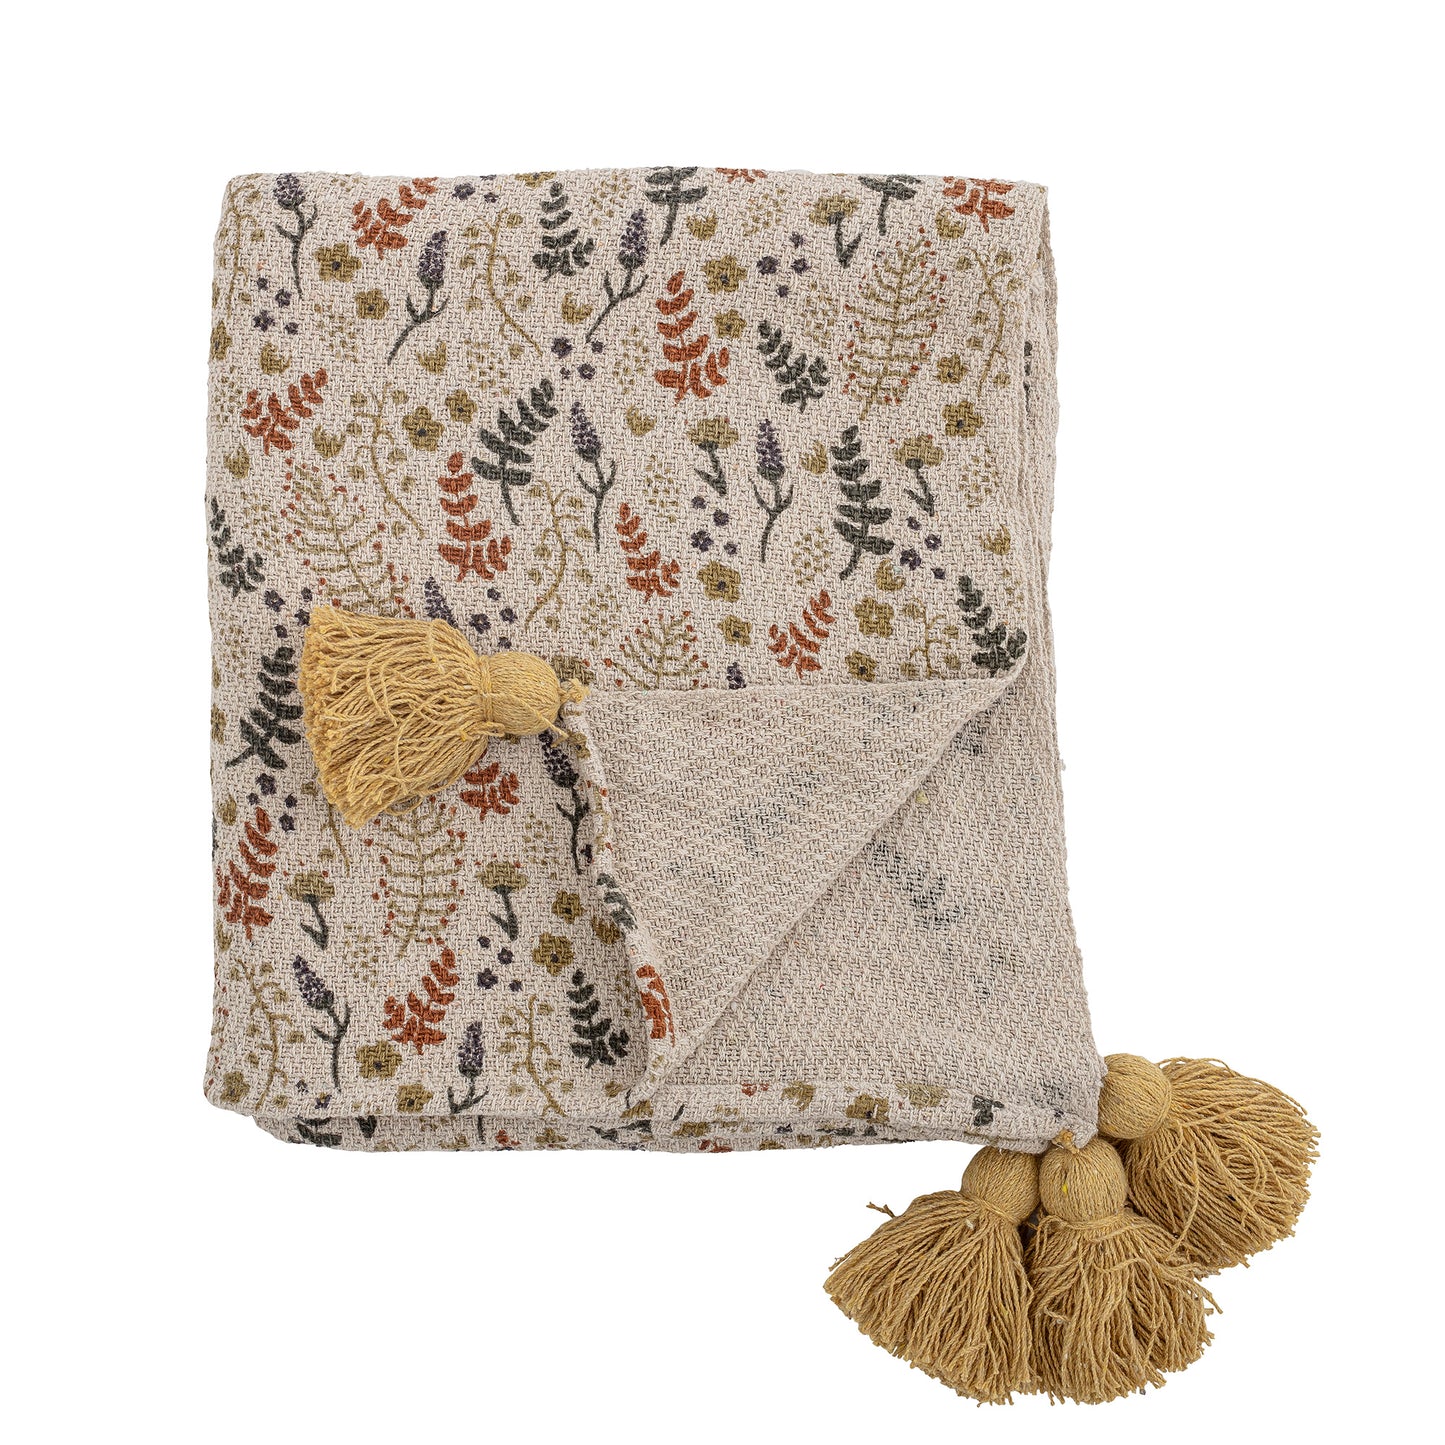 The Filipa Throw by Bloomingville MINI has a beautiful and relaxing flower pattern. The throw is made of recycled cotton material and has tassels, which gives a modern look. It is a soft, warm and cozy throw that you easily can use in other rooms than the children's room.